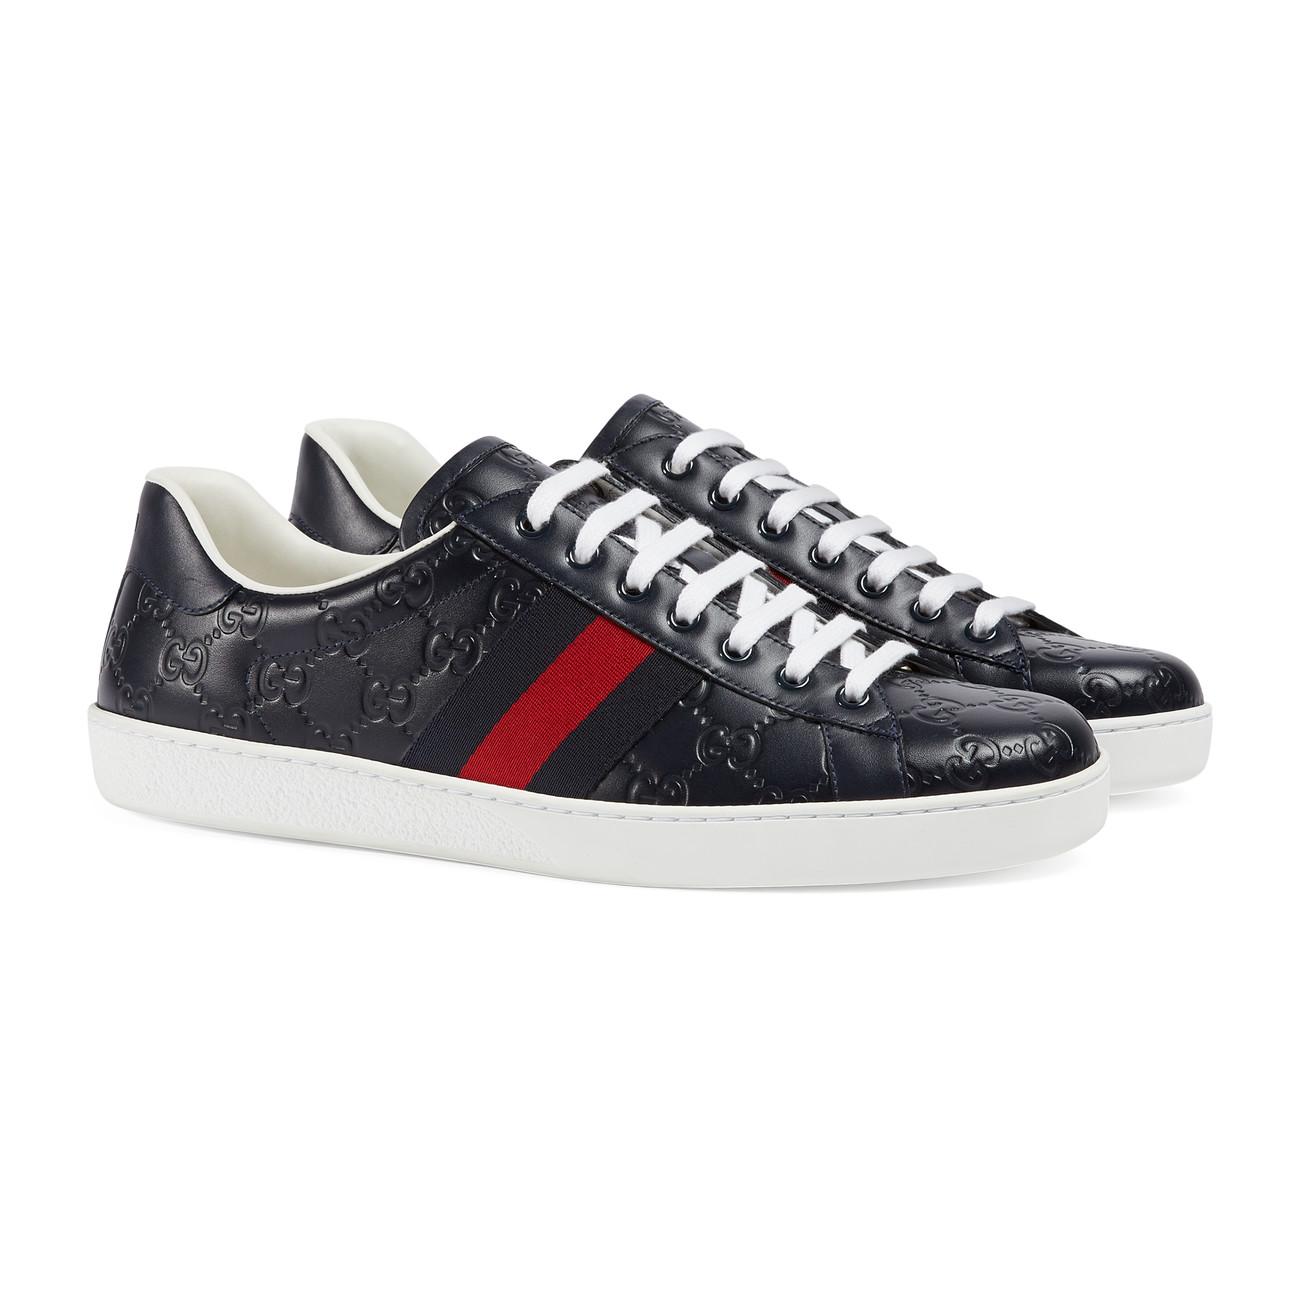 Gucci Leather Ace Signature Low-top Sneaker in Blue for Men - Lyst